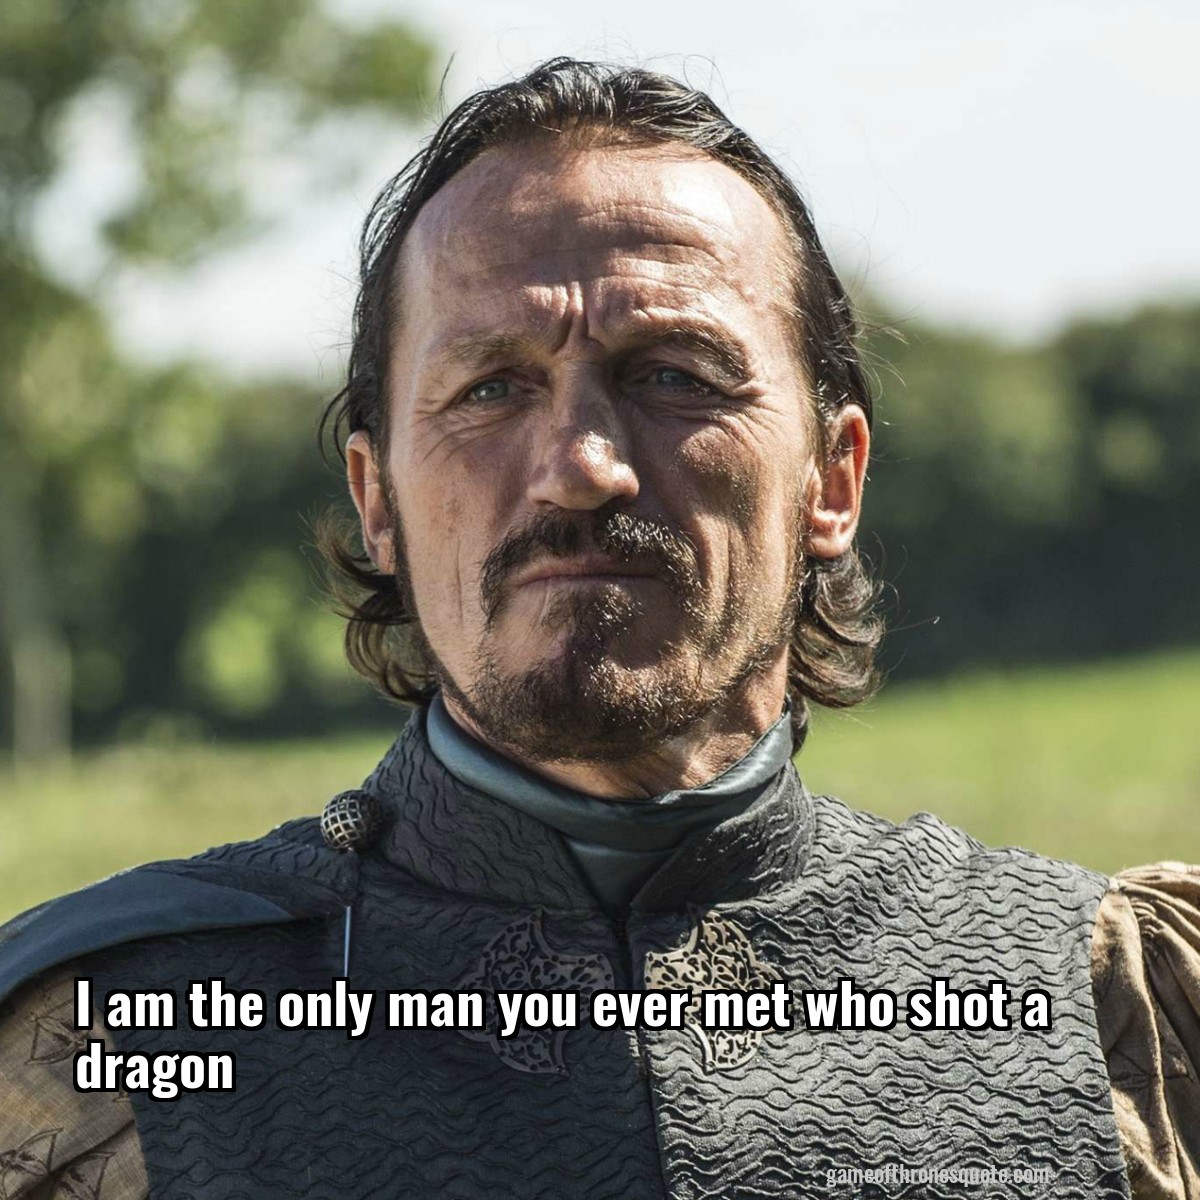 I am the only man you ever met who shot a dragon